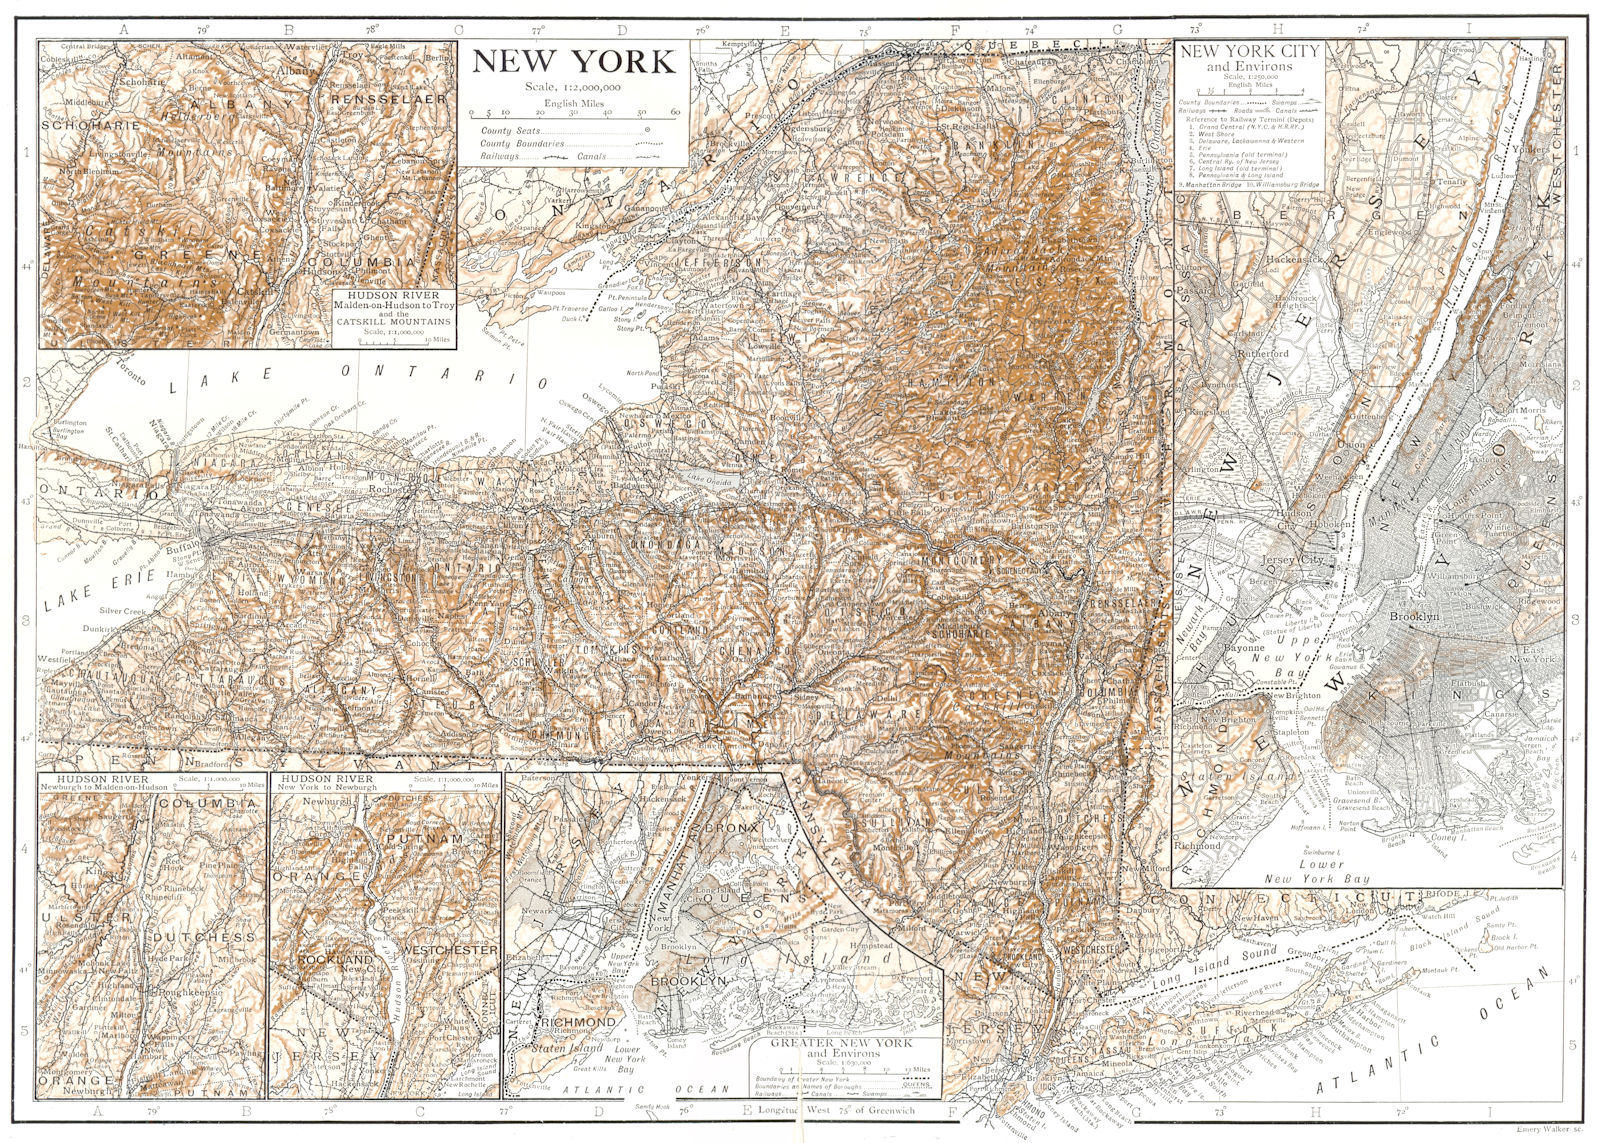 NEW YORK STATE. Inset Hudson river; New York City; Catskill Mountains 1910 map